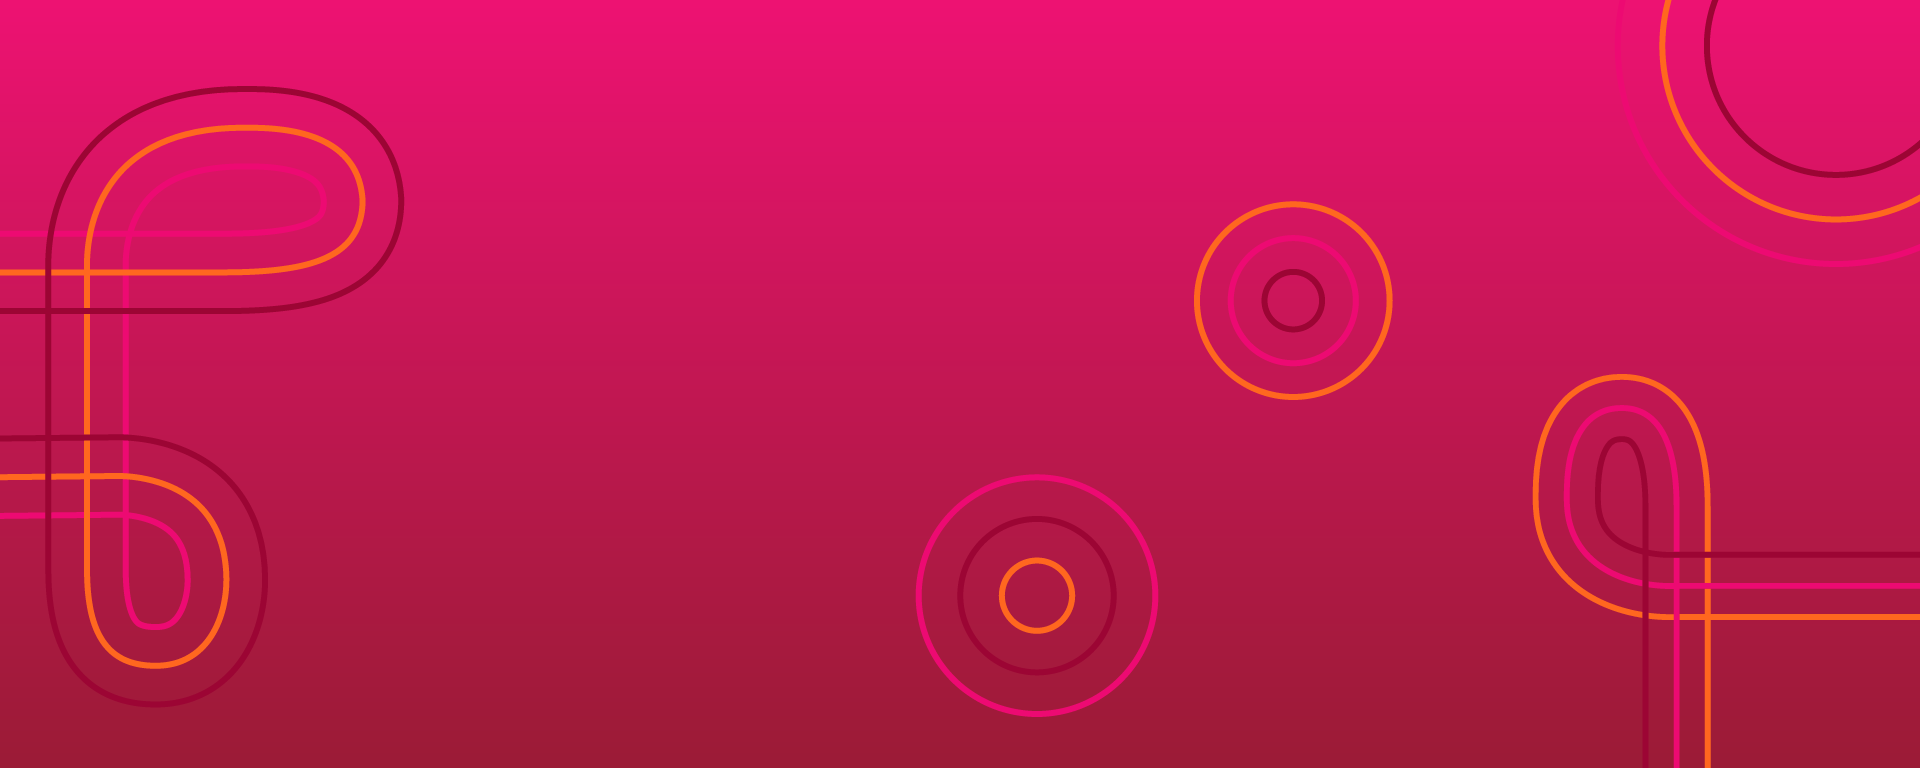 Pink and berry background with orange and pink swirls on top